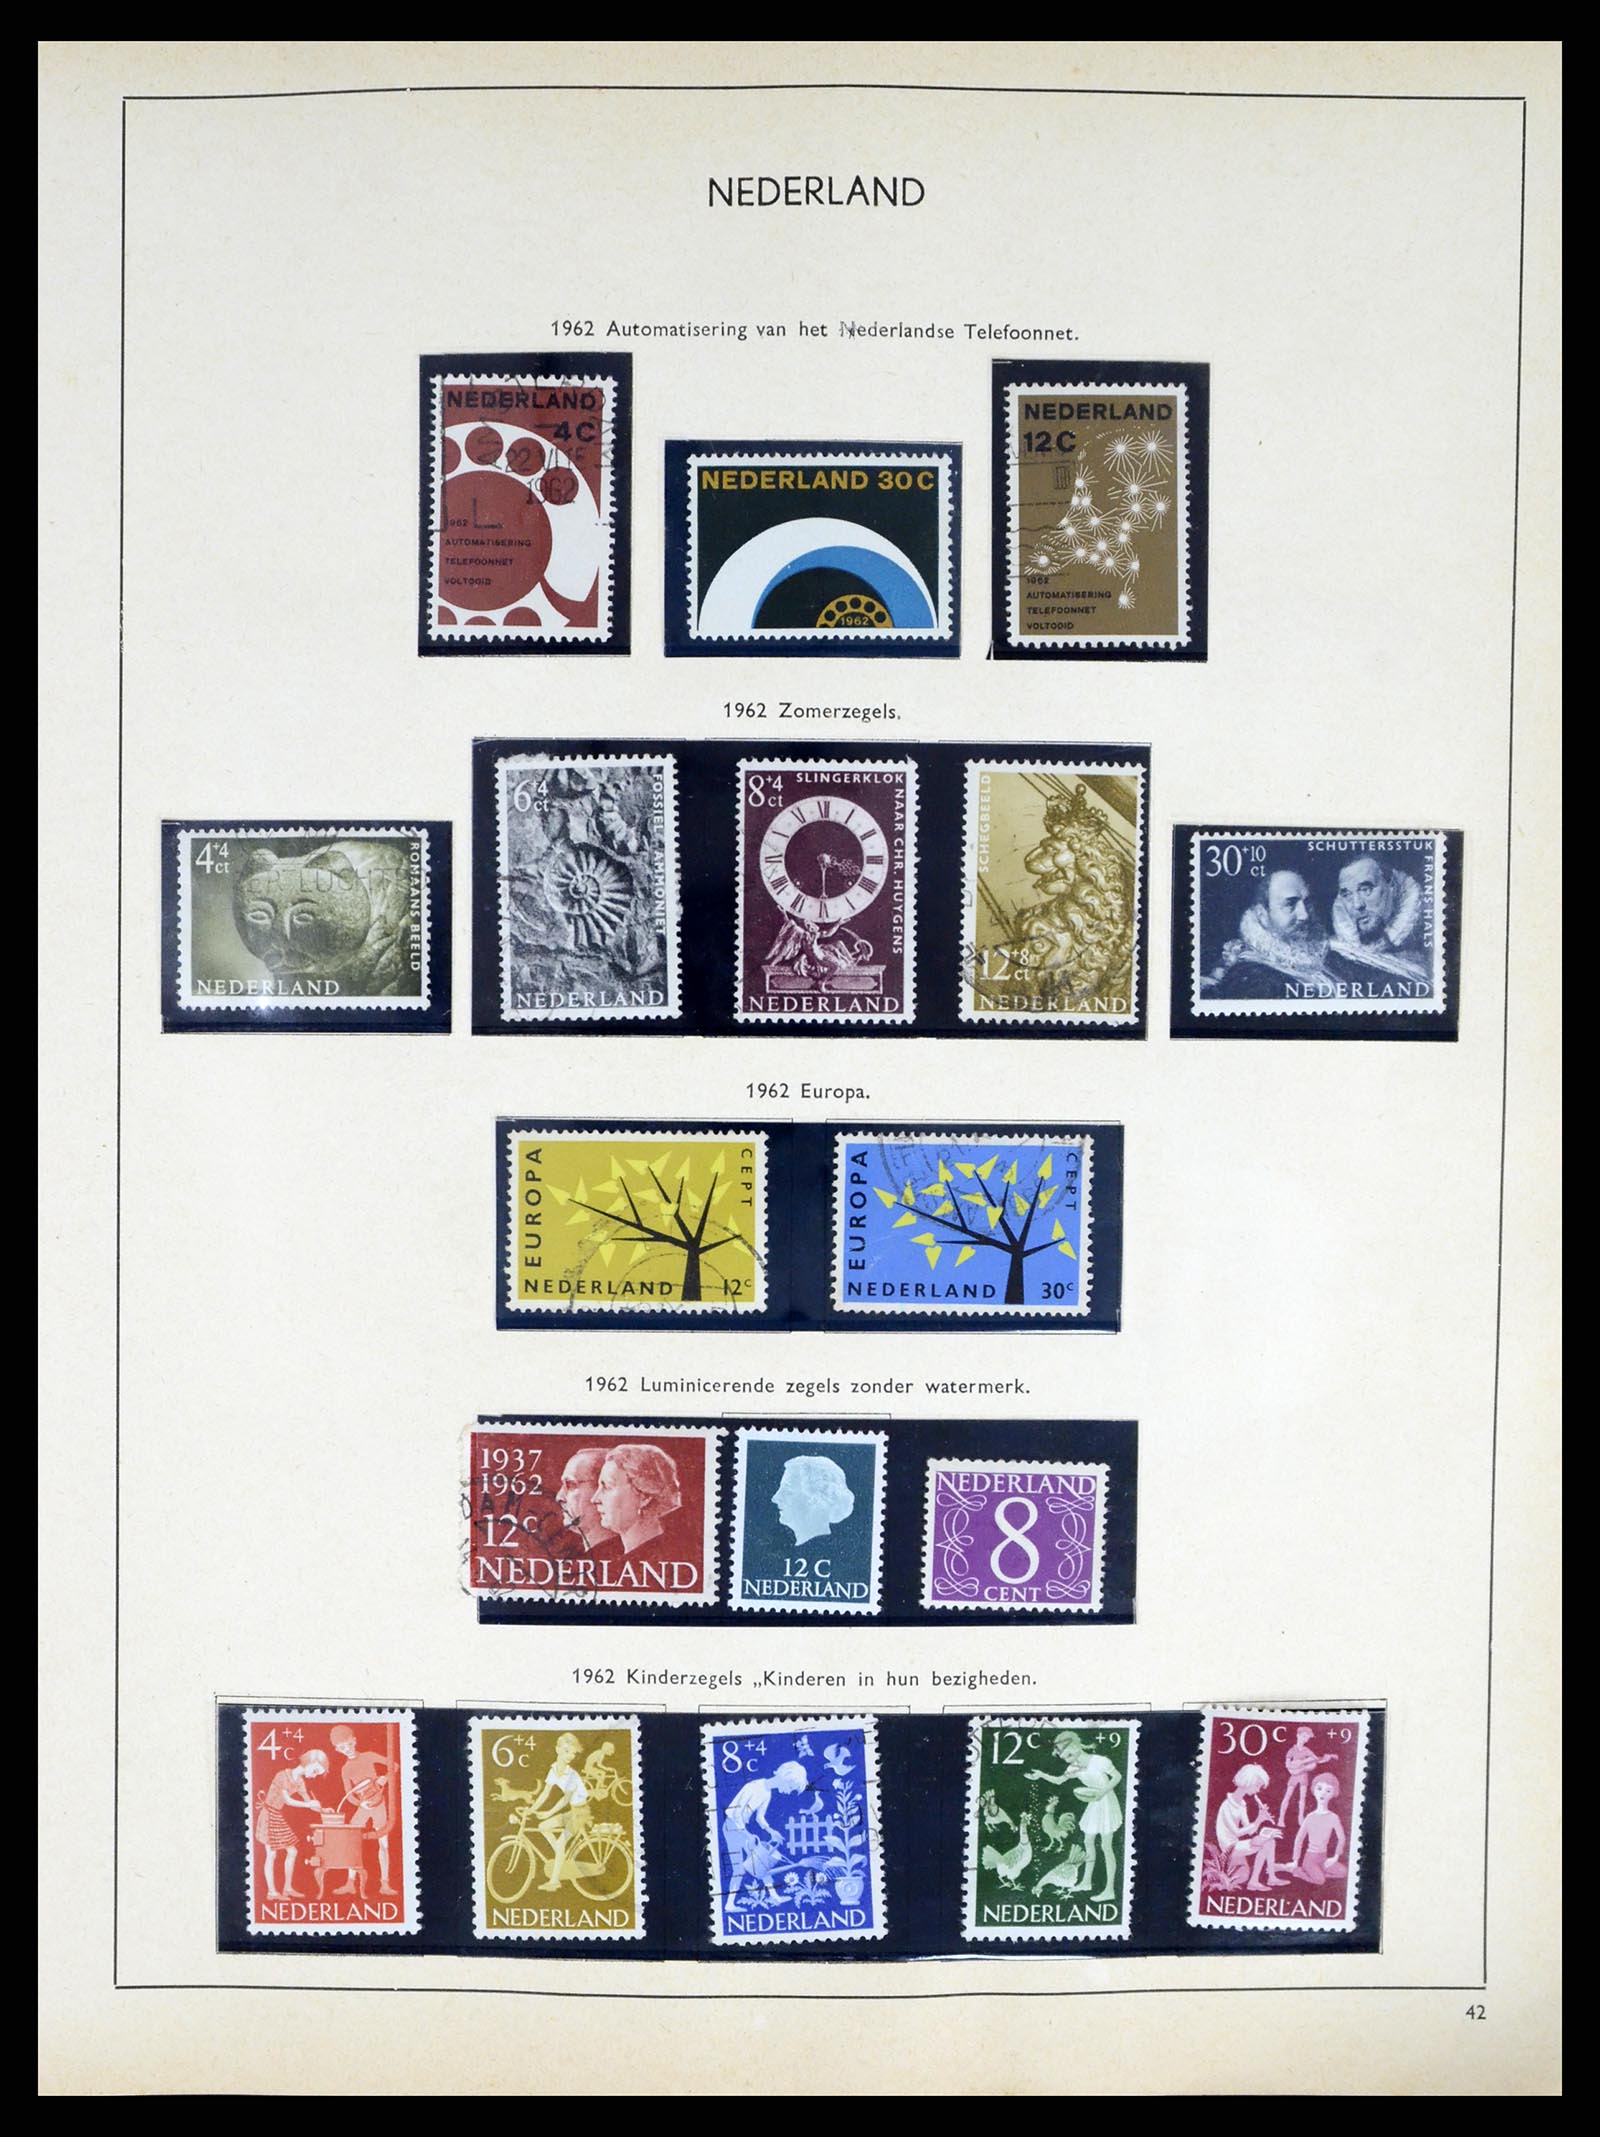 37618 038 - Stamp collection 37618 Netherlands and territories 1852-1972.